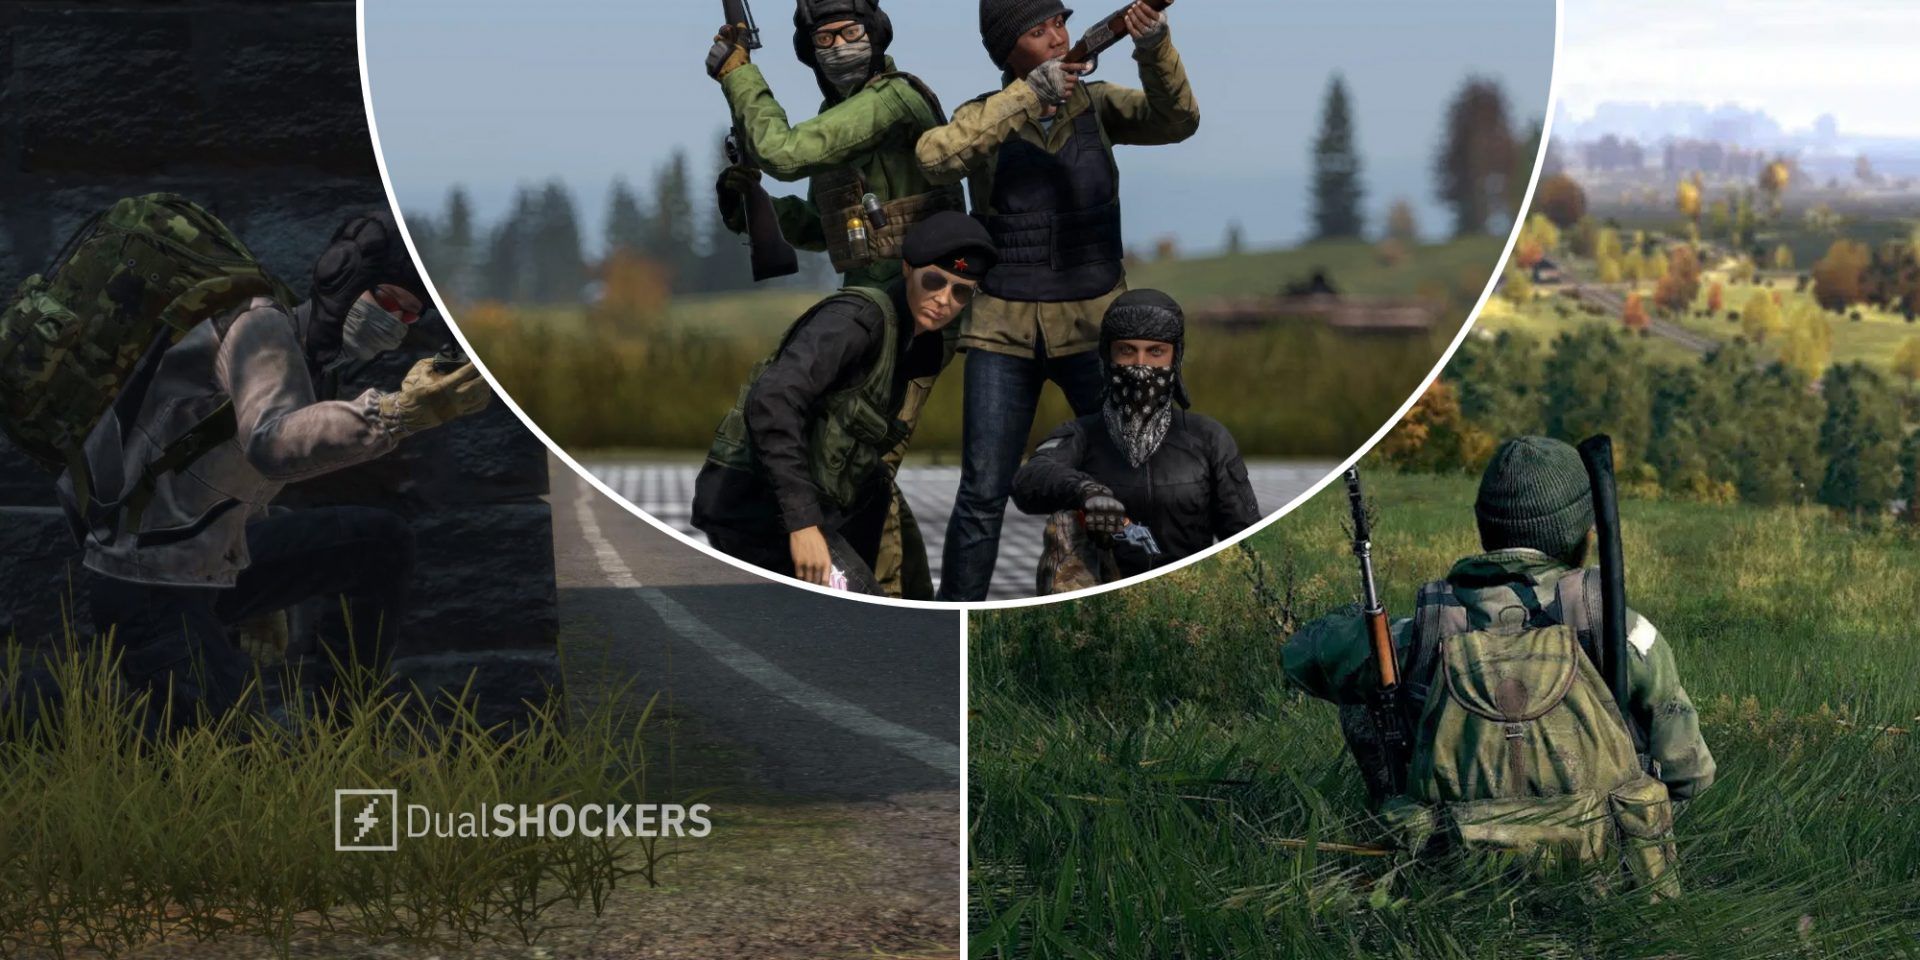 DayZ player hiding with weapon on left, DayZ characters posing in middle, player sitting in grass overlooking the landscape on right